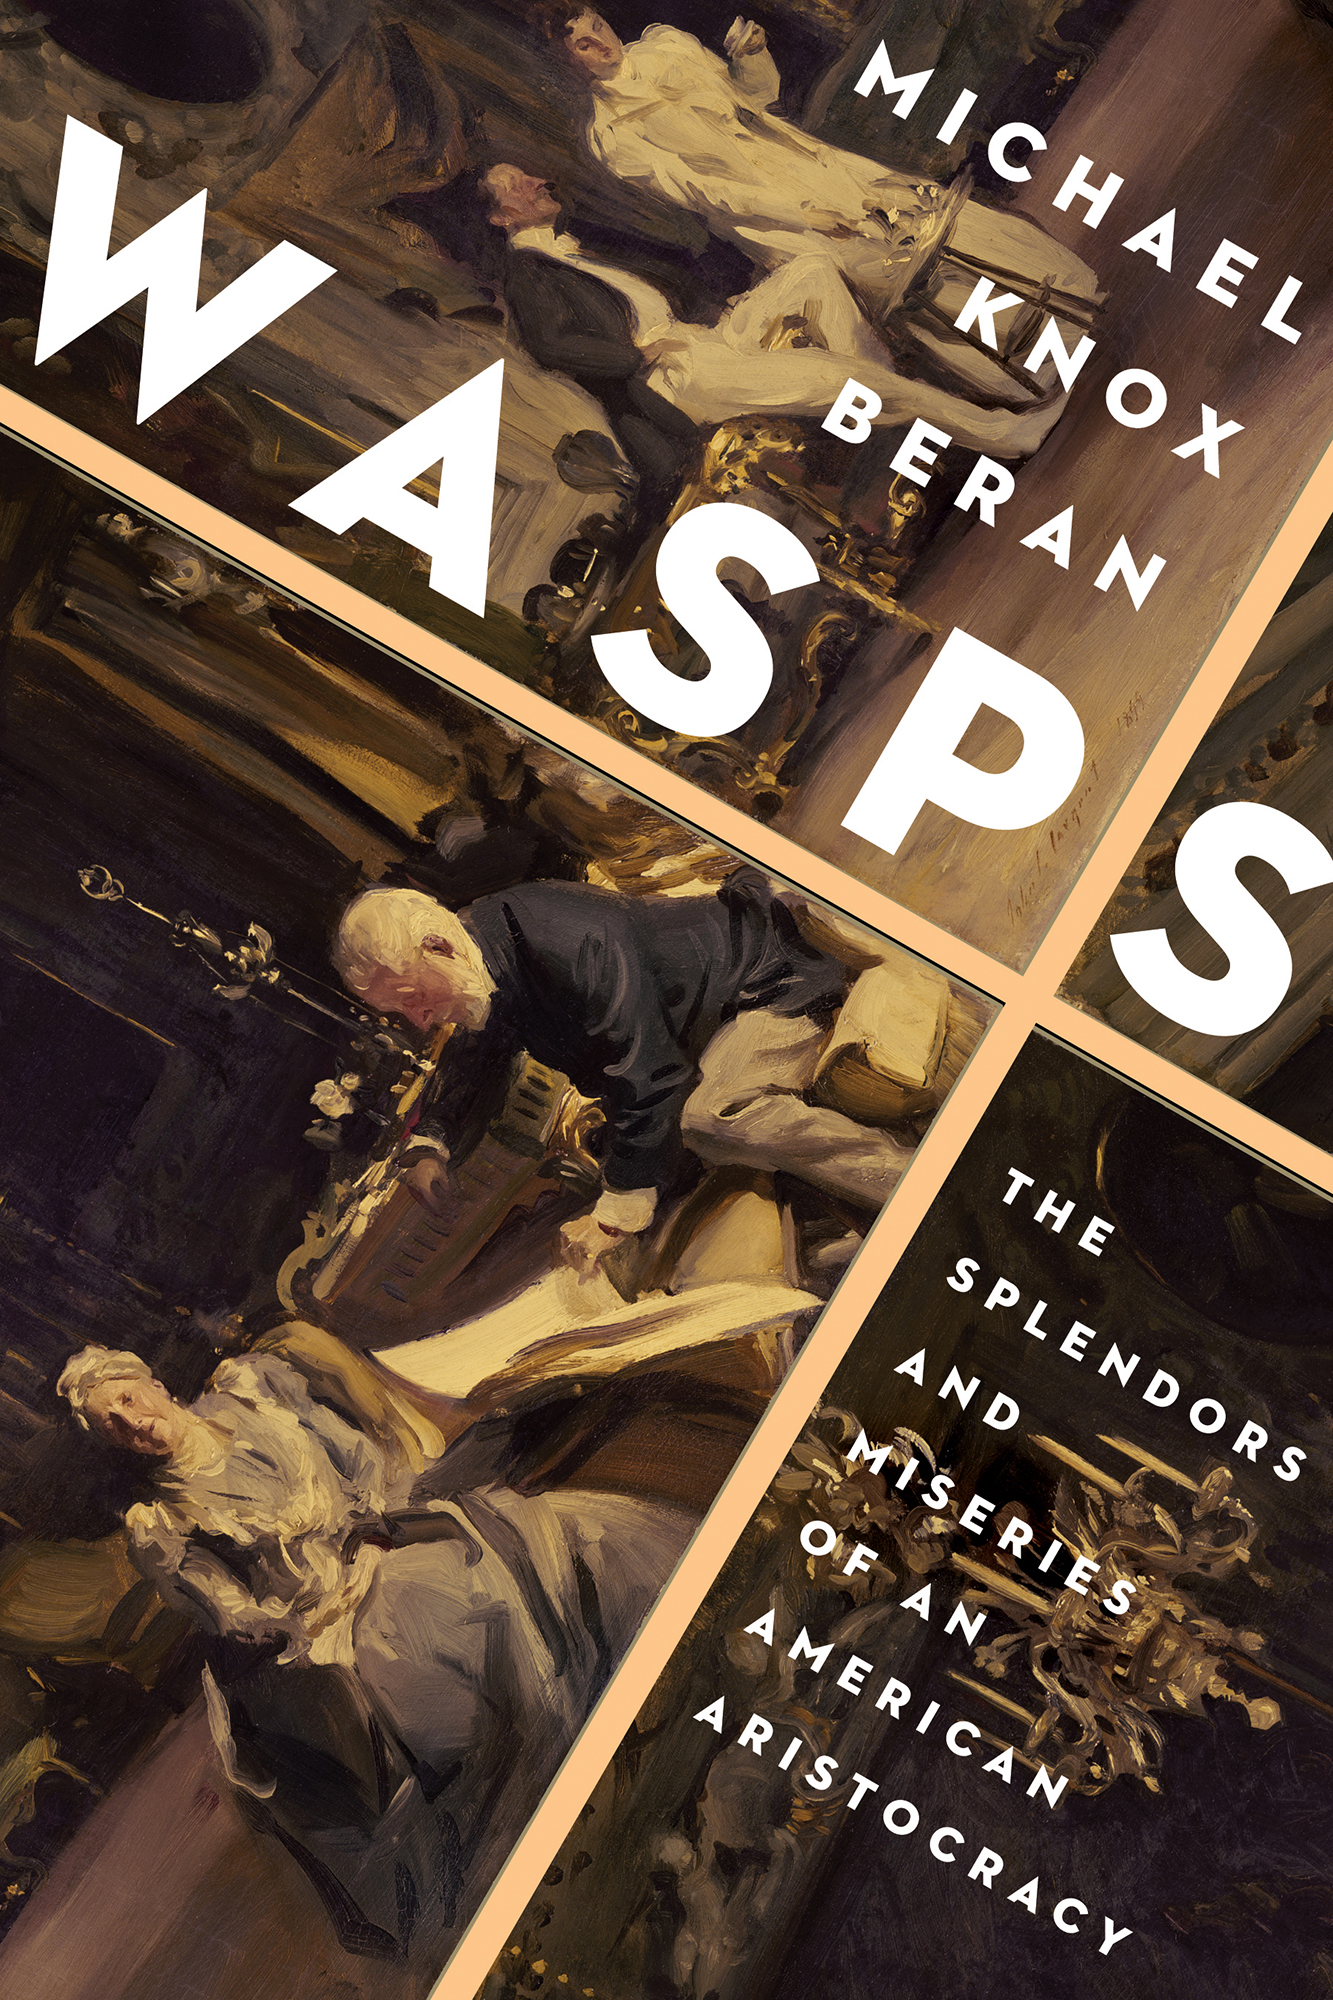 Michael Knox Beran Wasps The Splendors and Miseries of an American Aristocracy - photo 1